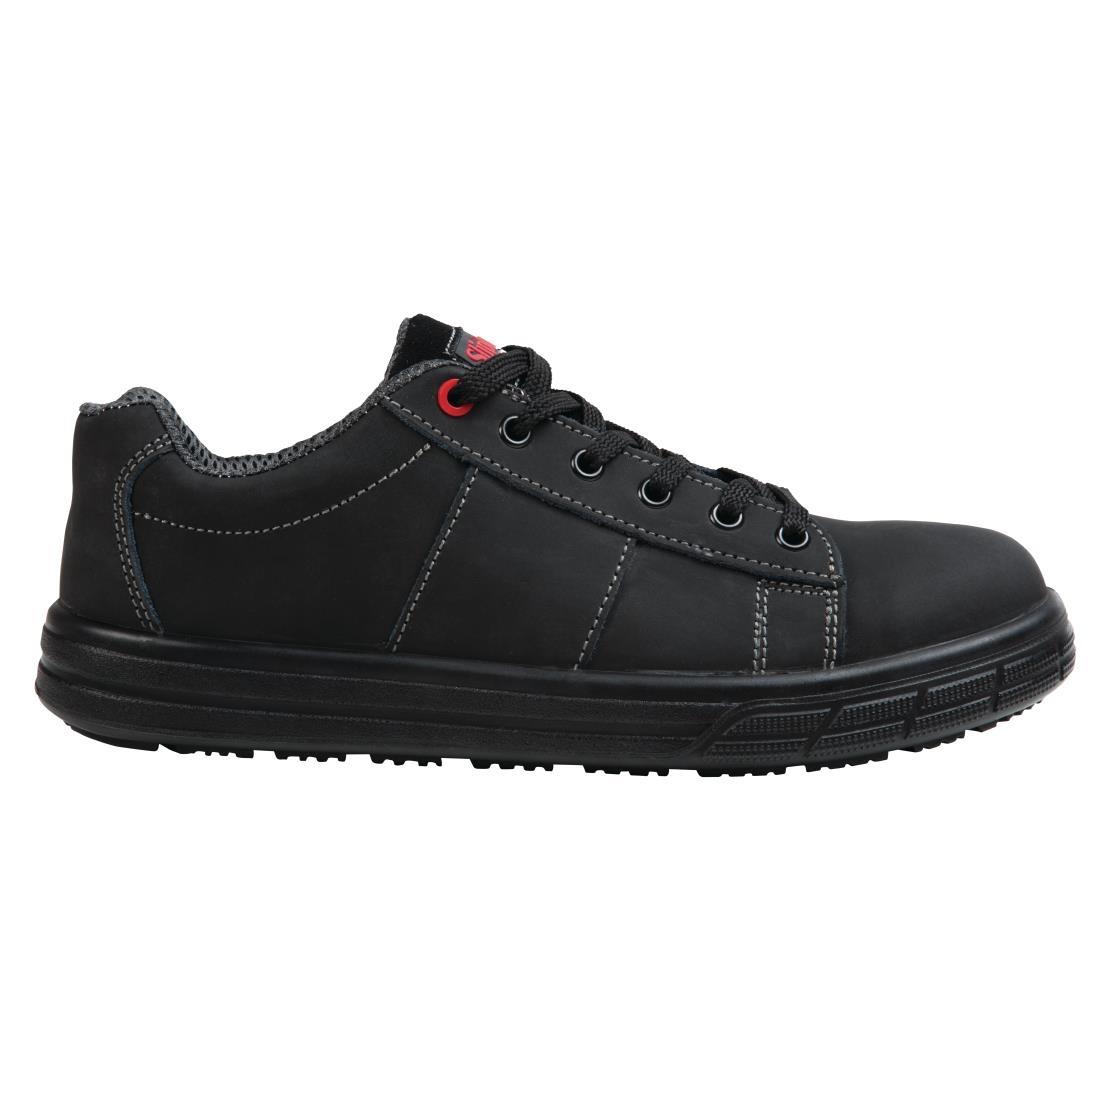 Slipbuster Safety Trainers Black 45 - BB420-45  - 5